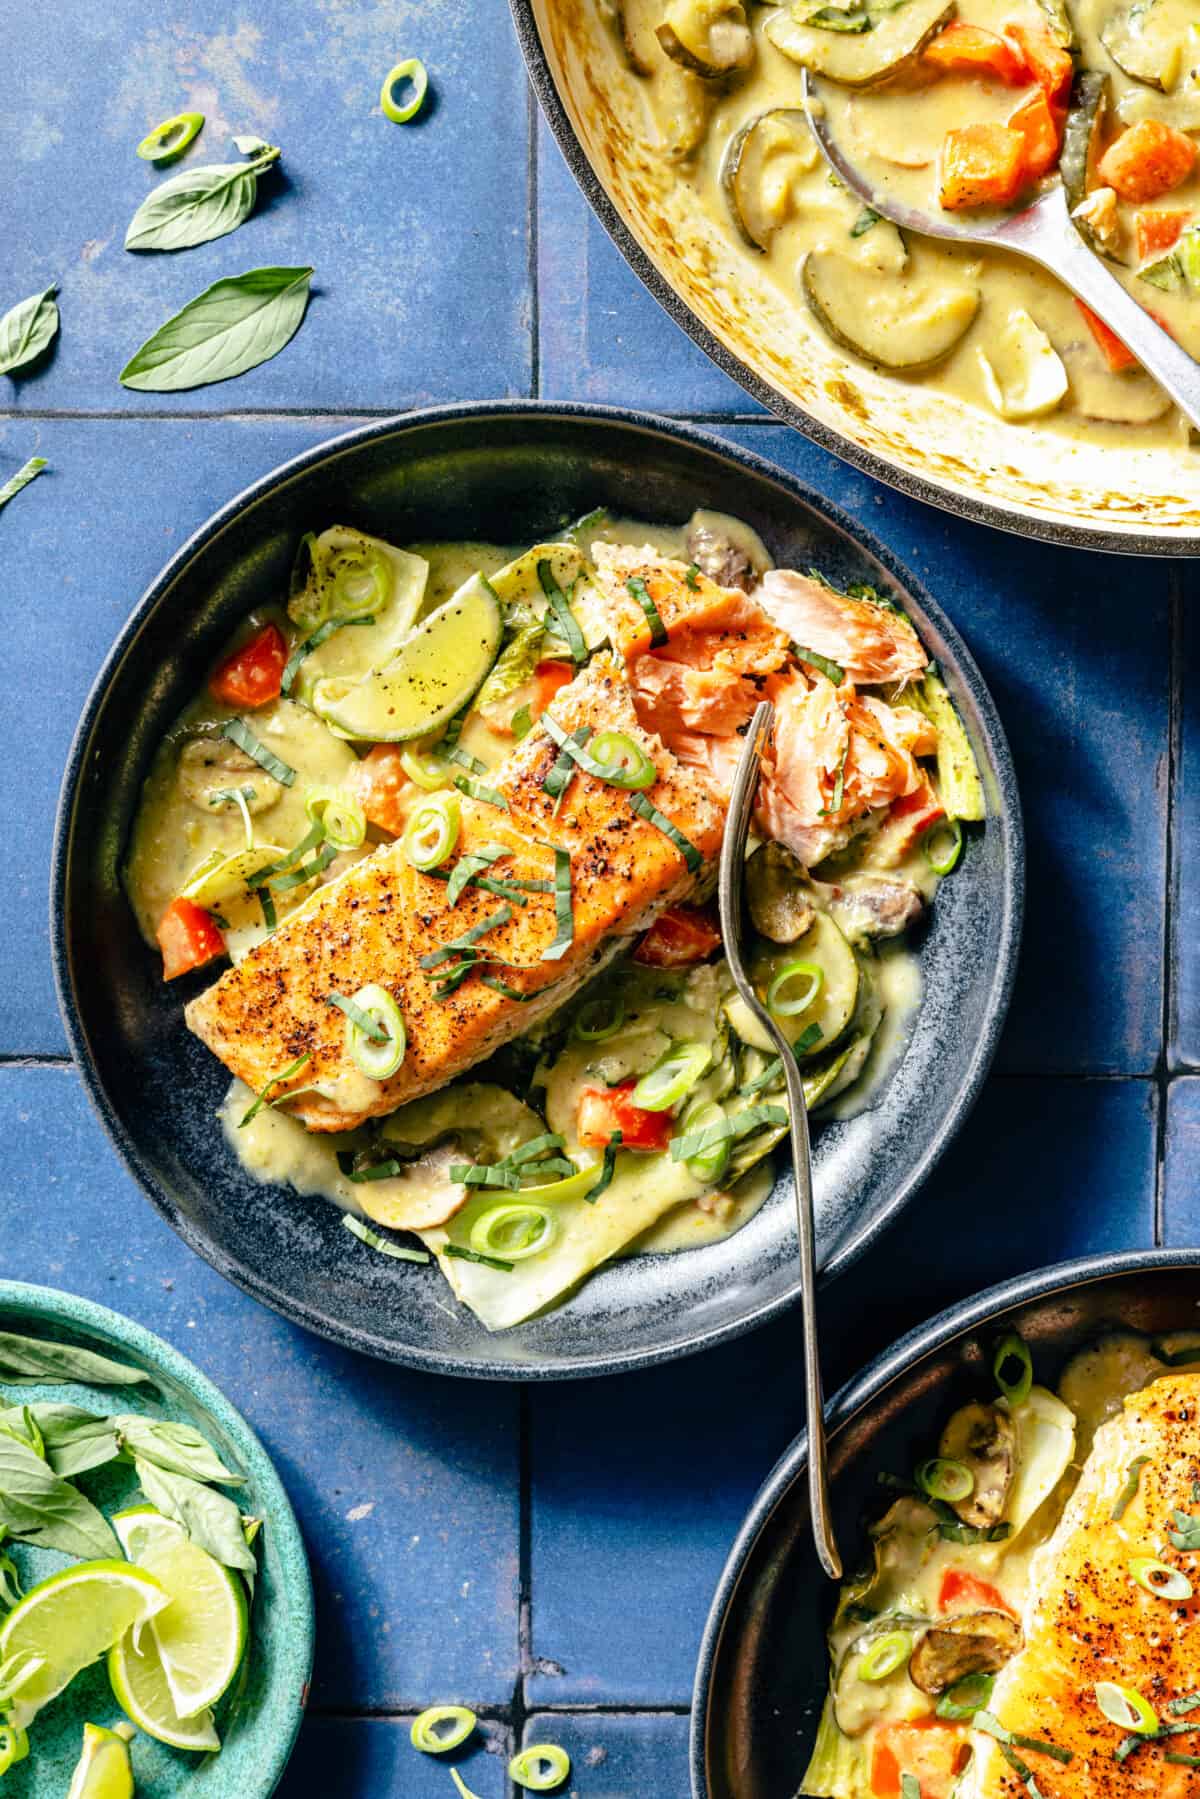 Thai-Inspired Coconut Green Curry Salmon plated in blue bowl.